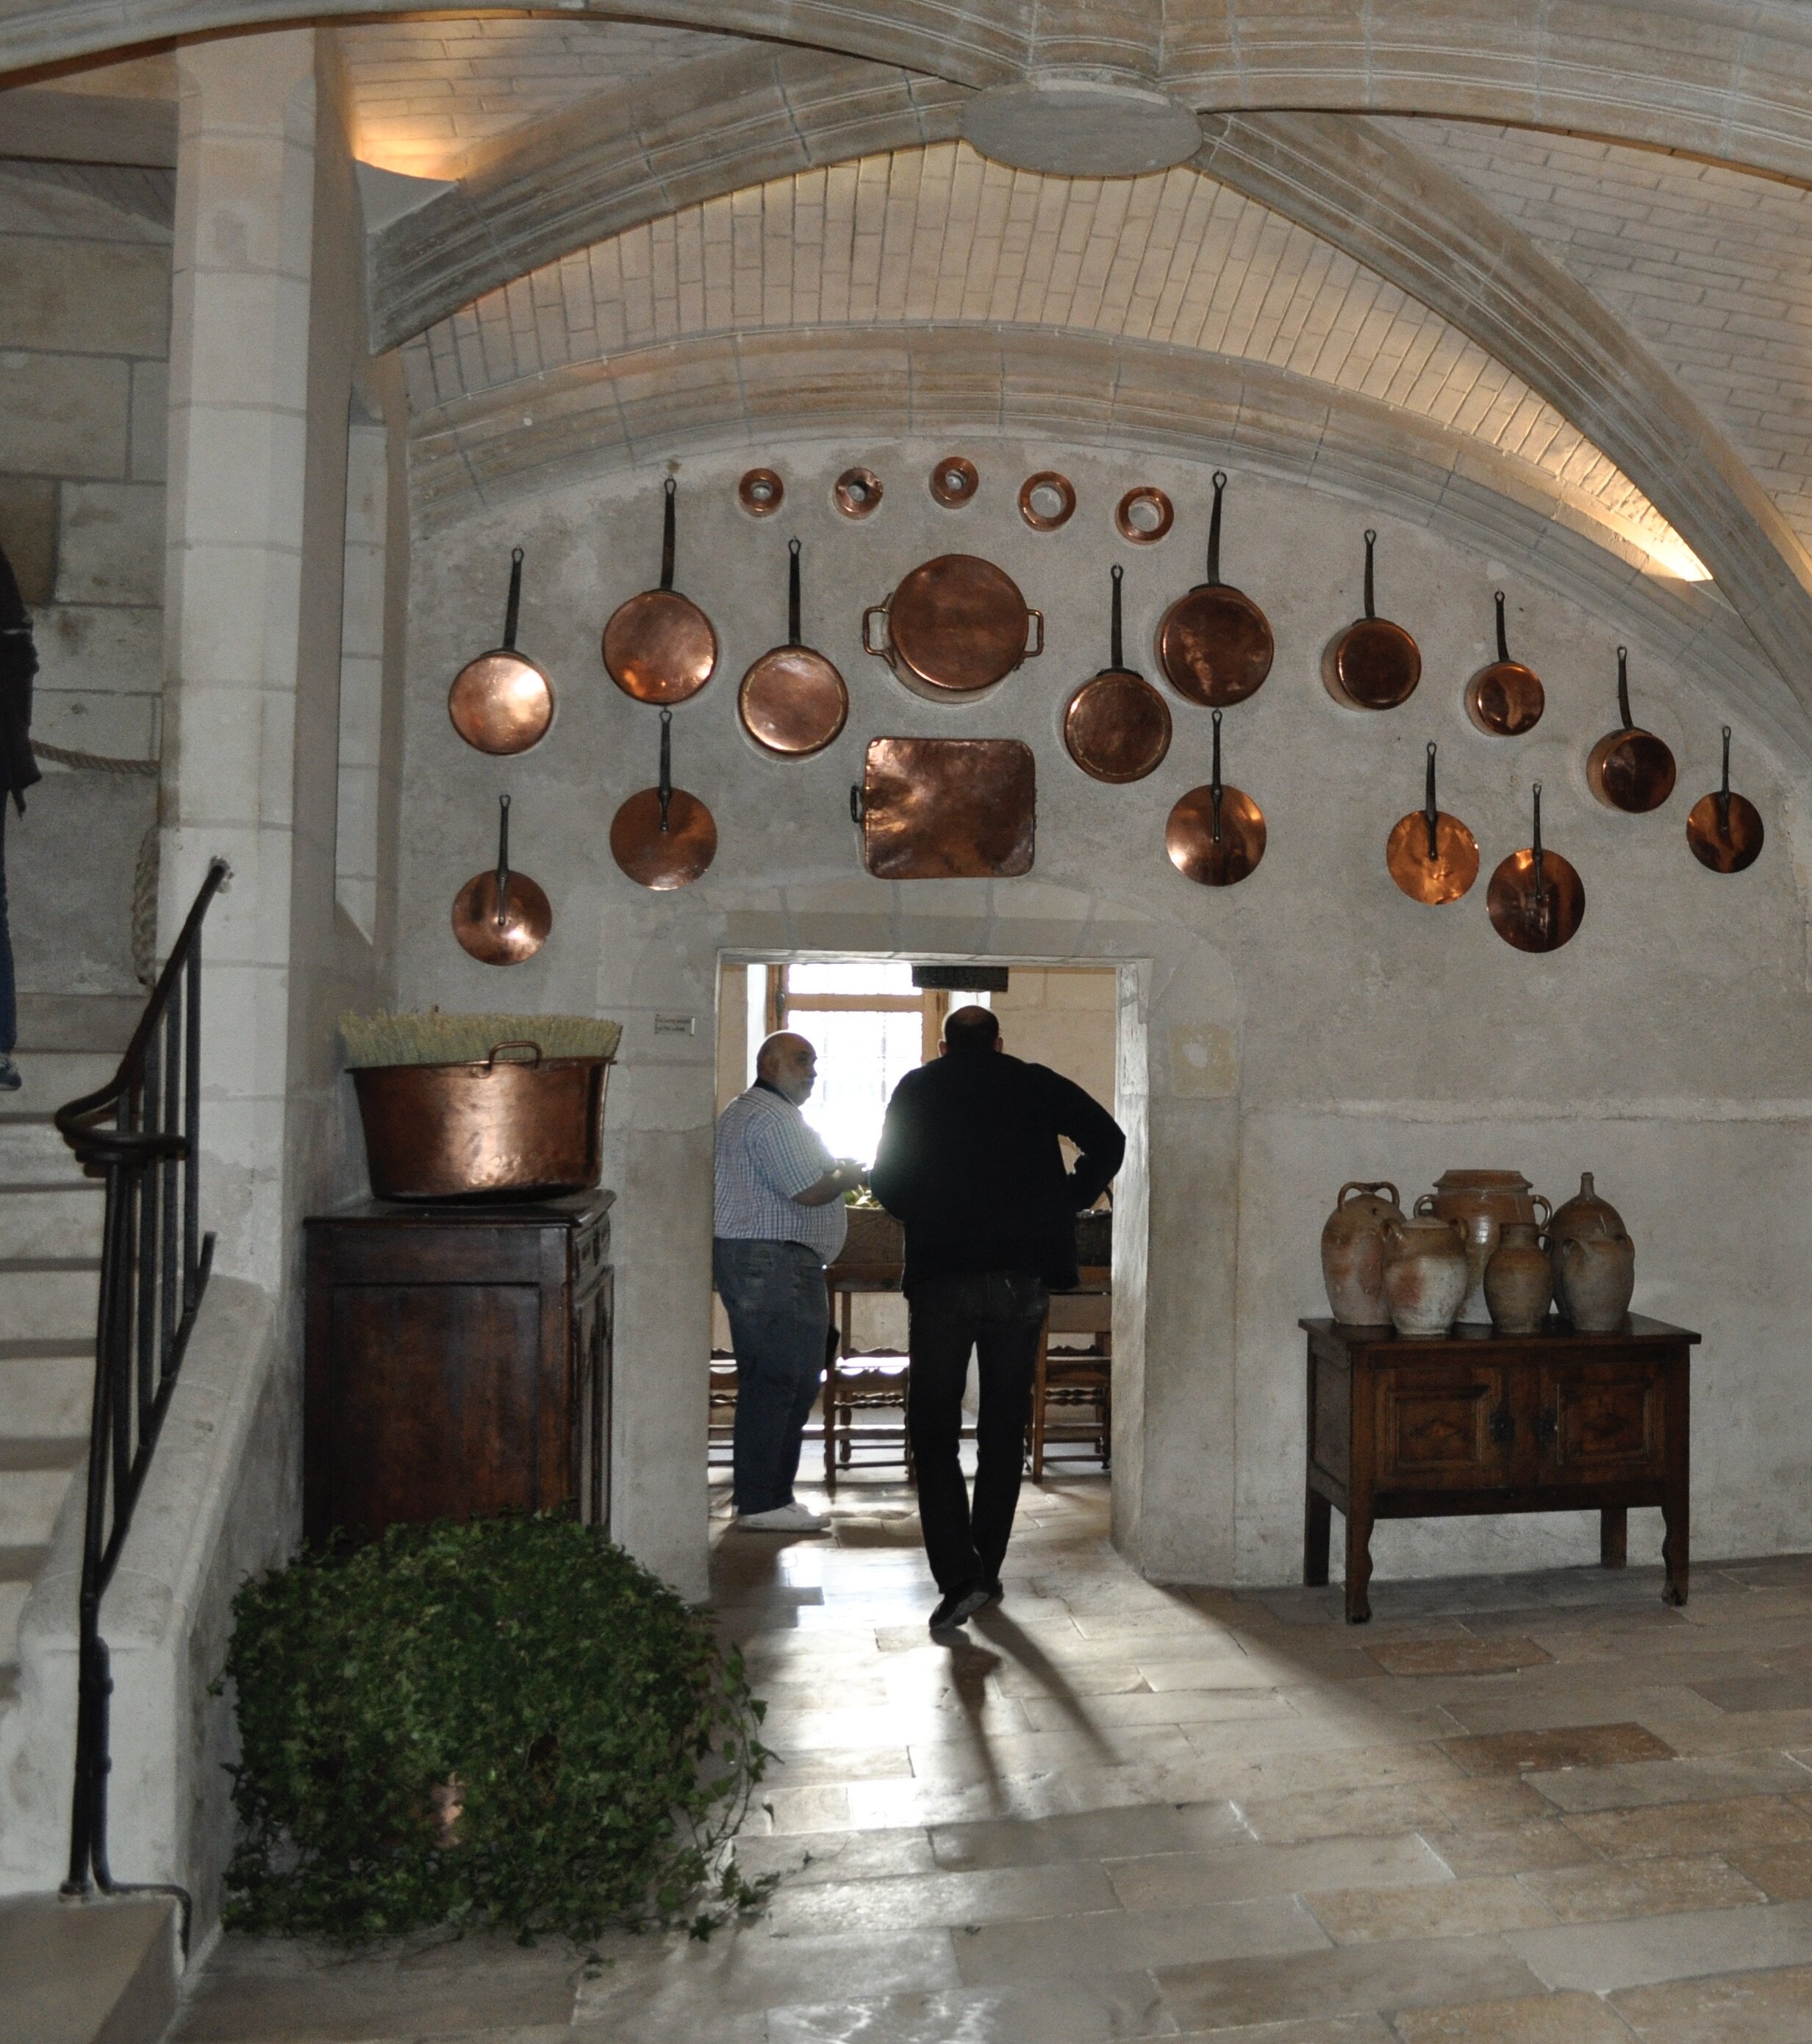 The kitchens at Chenonceau